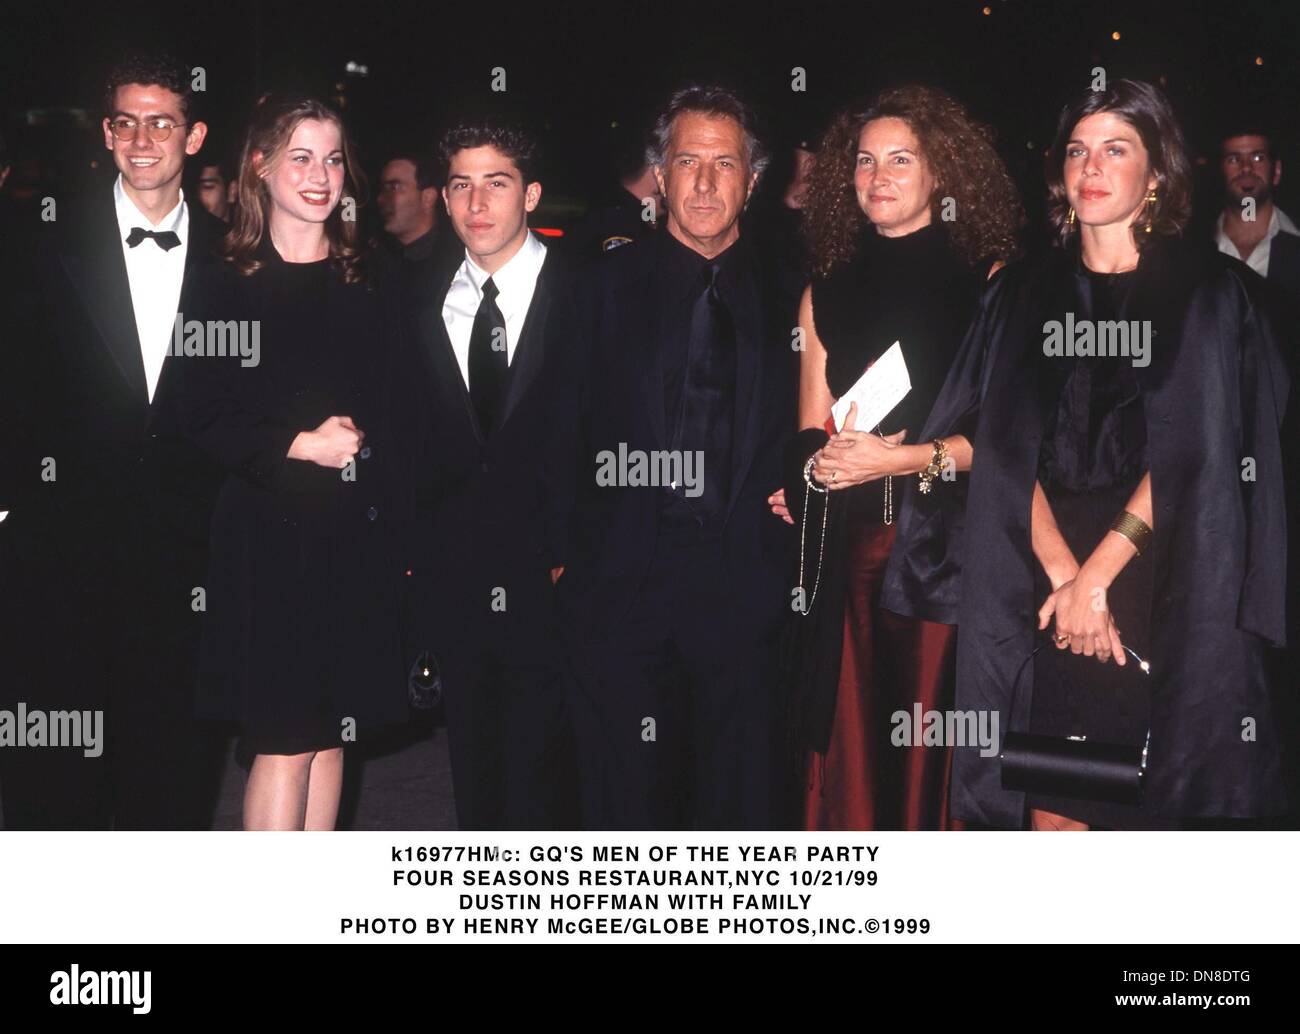 oct-21-1999-k16977hmc-gq-s-men-of-the-year-party-at-four-seanons